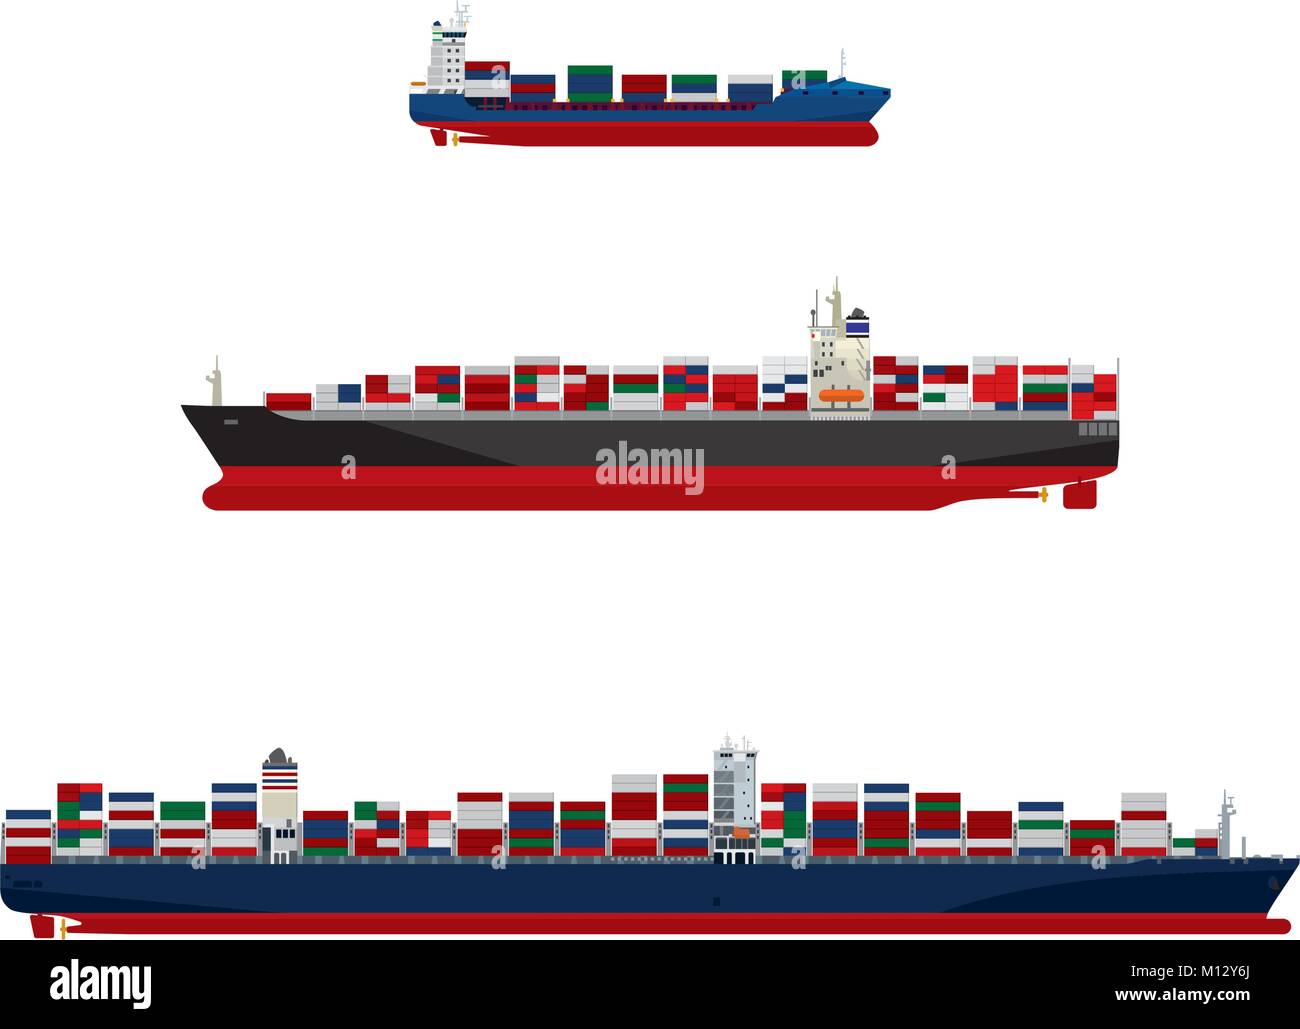 Cargo container vessels in three sizes. Feeder ship, panamax class and ultra-large container ship vector illustration Stock Vector